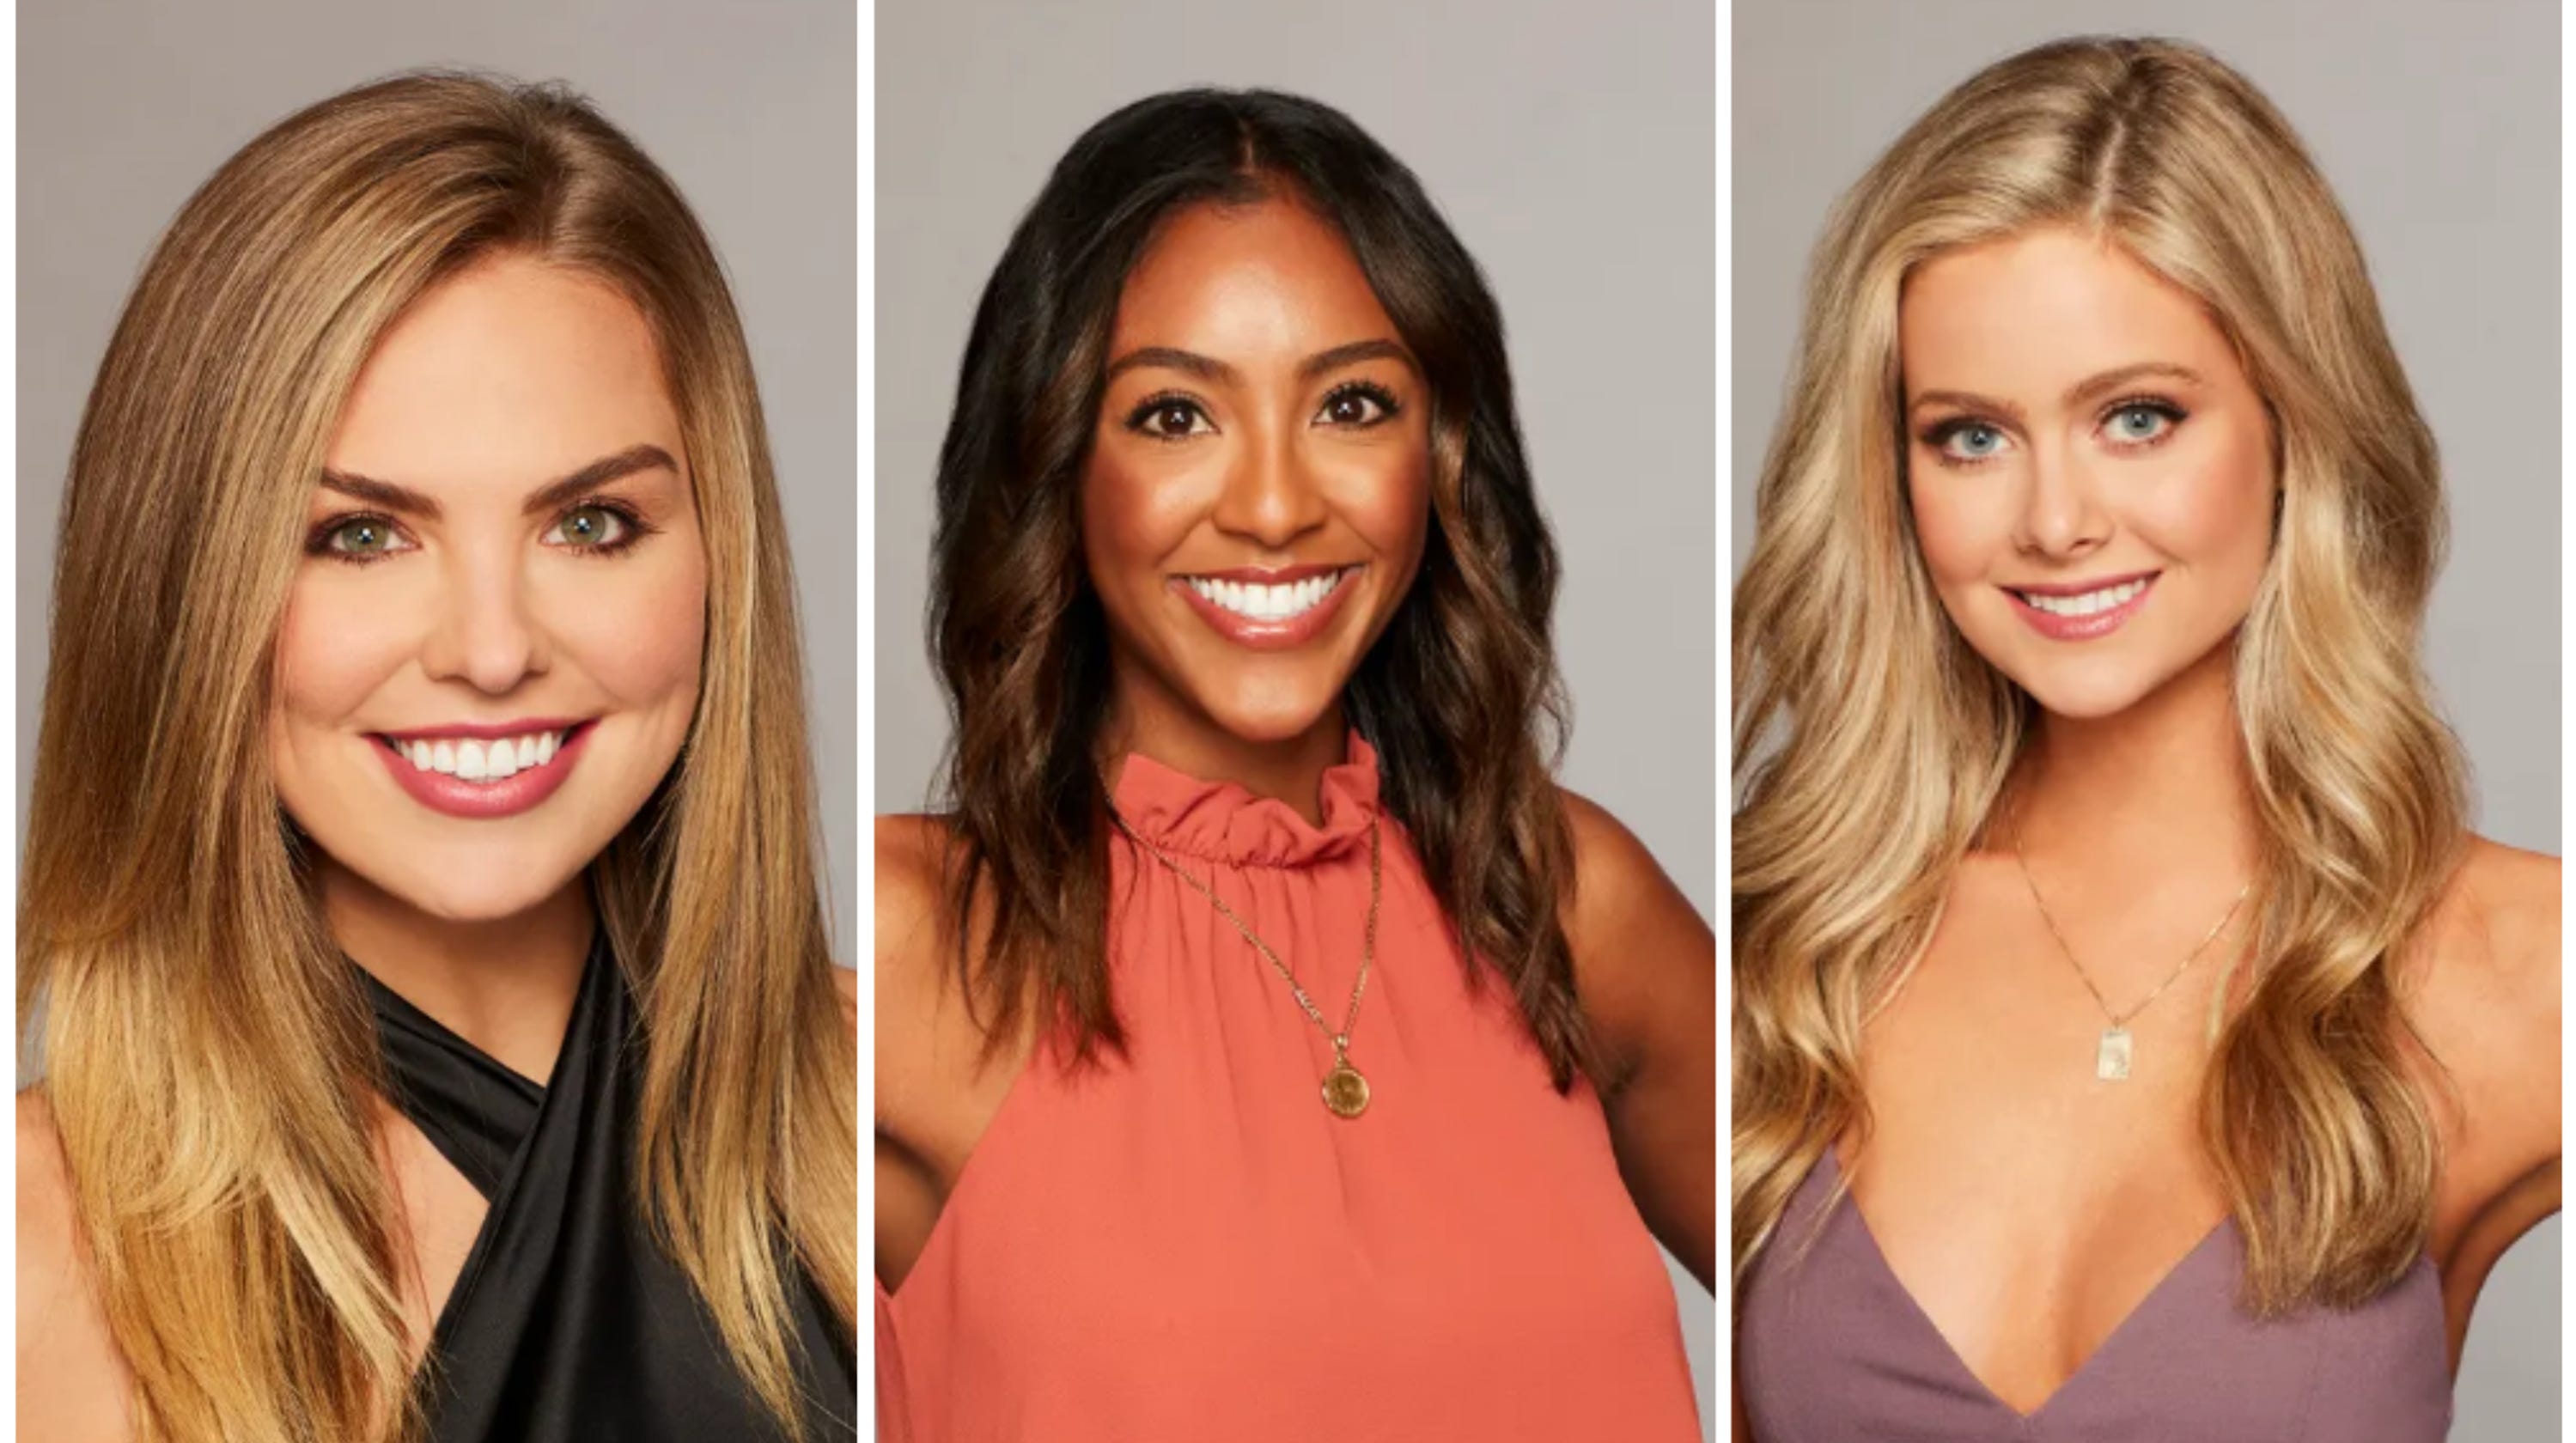 The Bachelorette for 2019 is